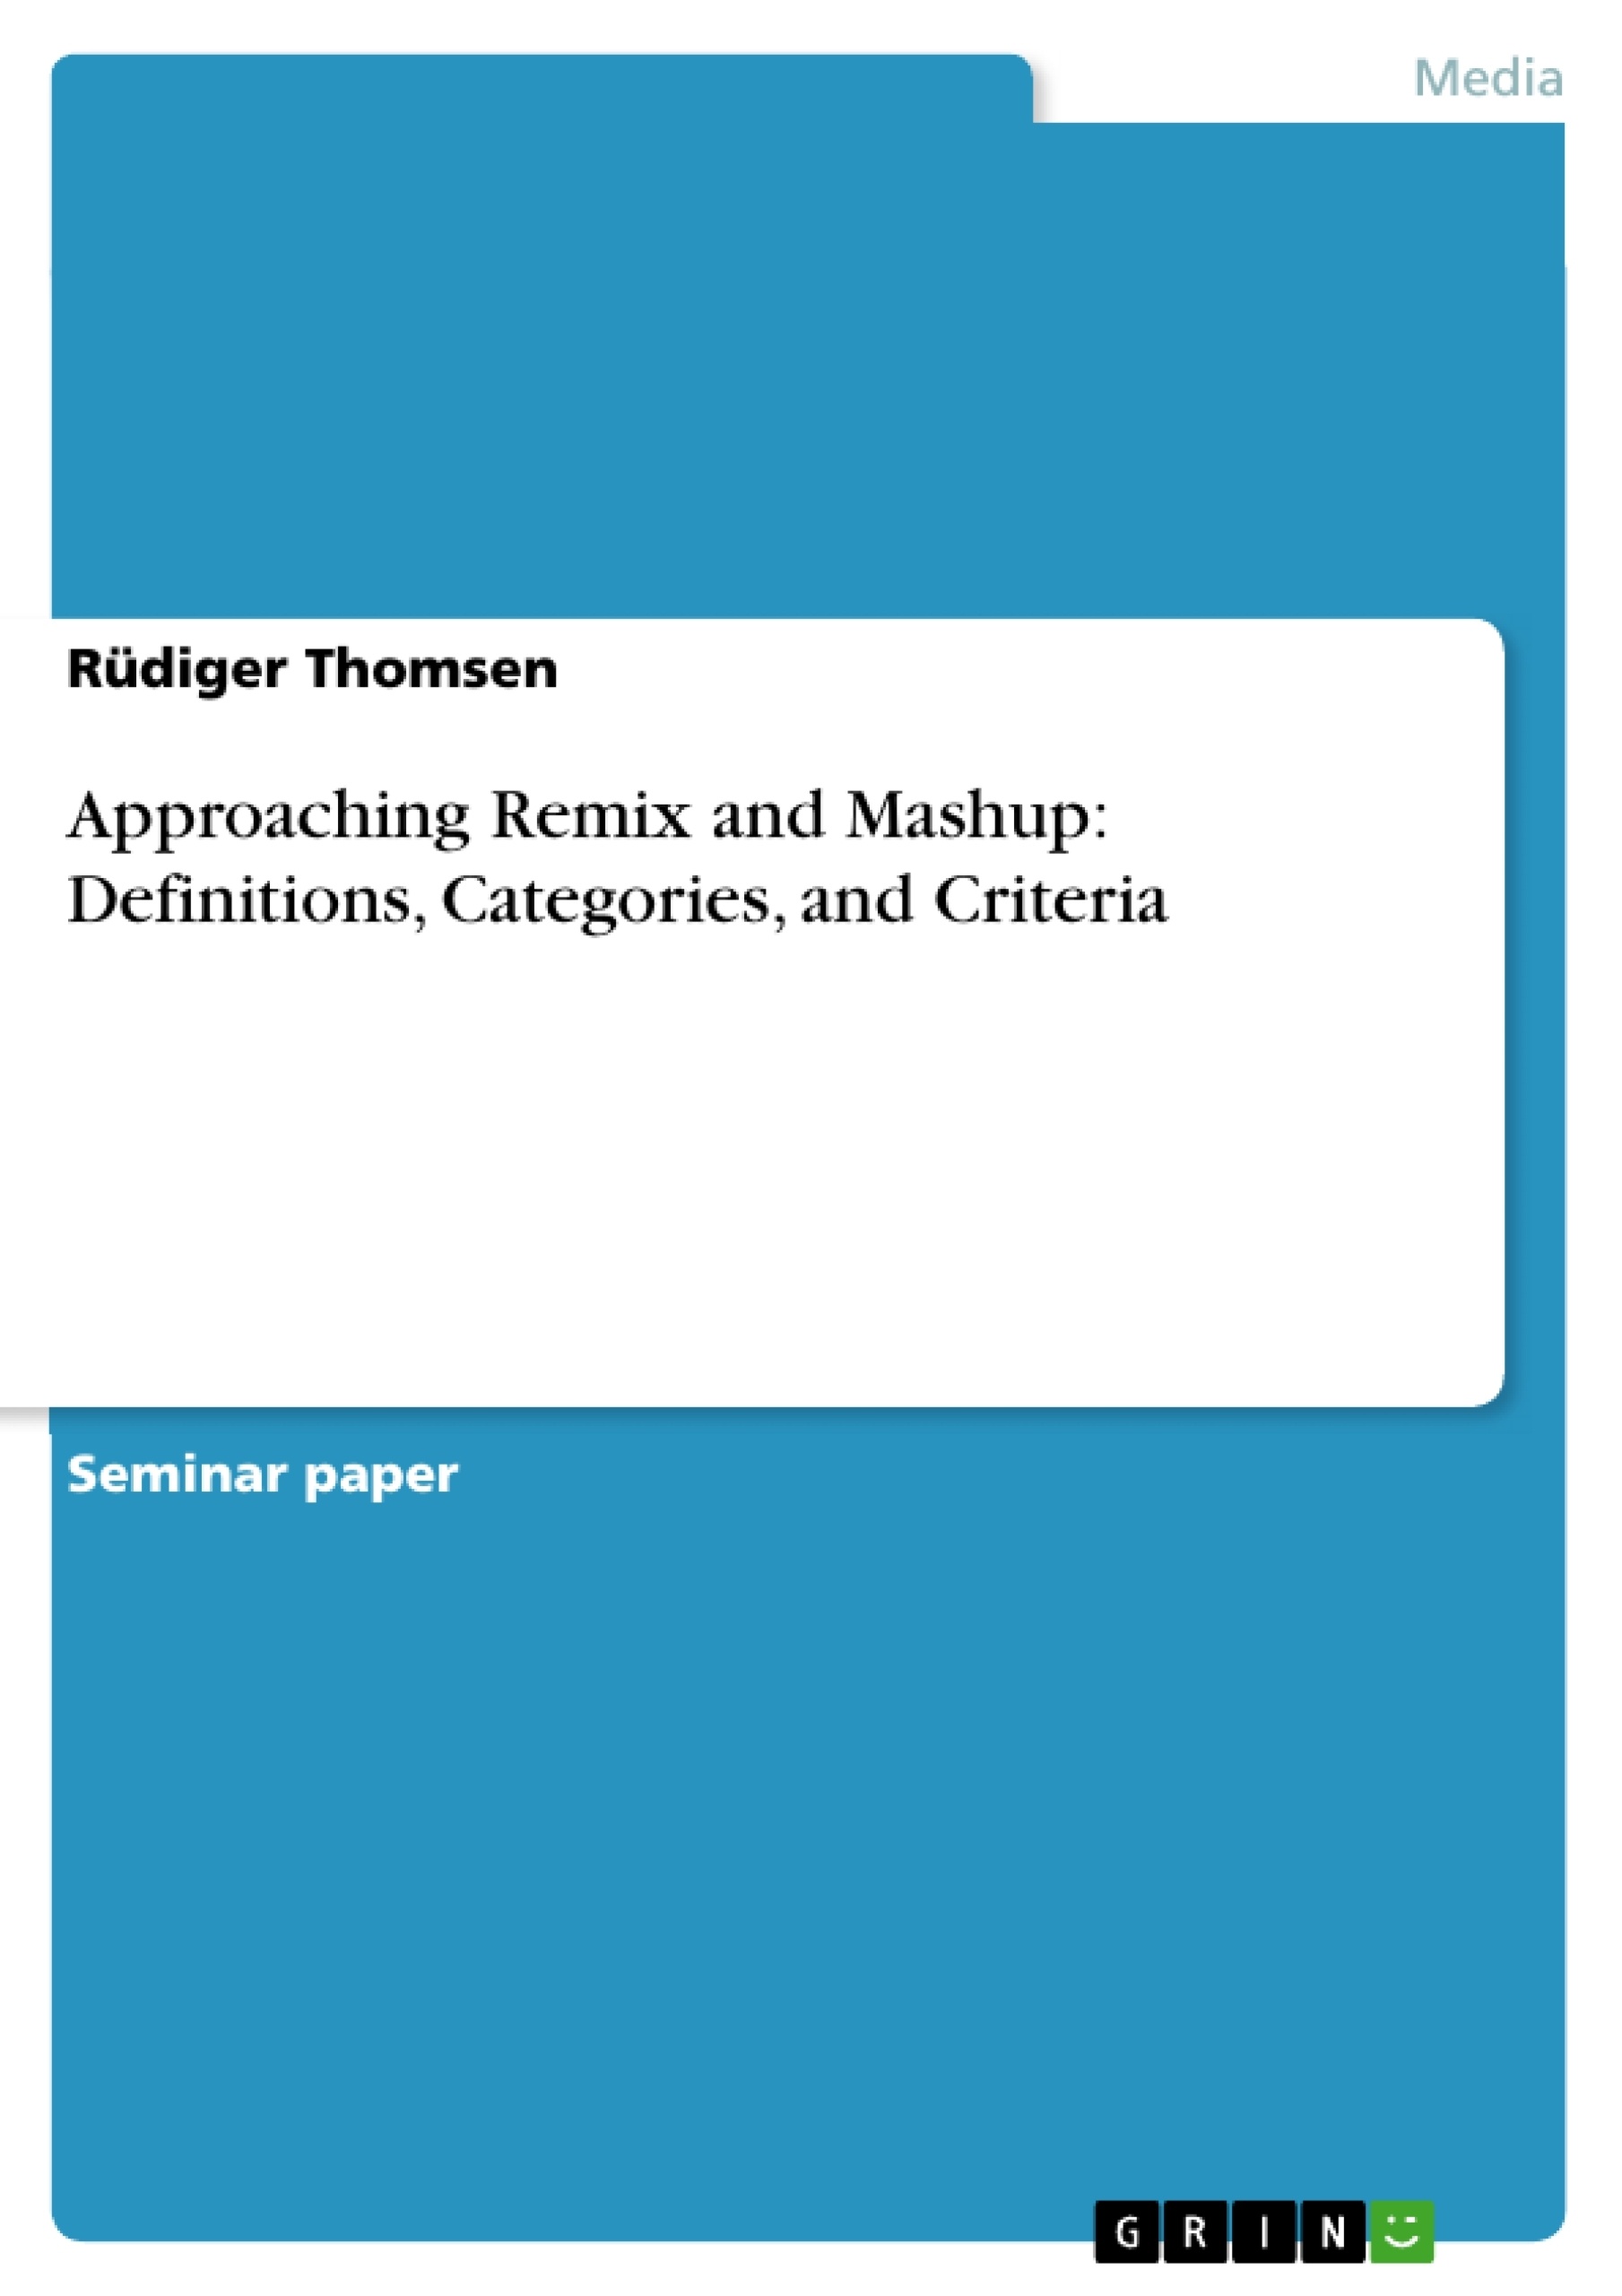 Title: Approaching Remix and Mashup: Definitions, Categories, and Criteria